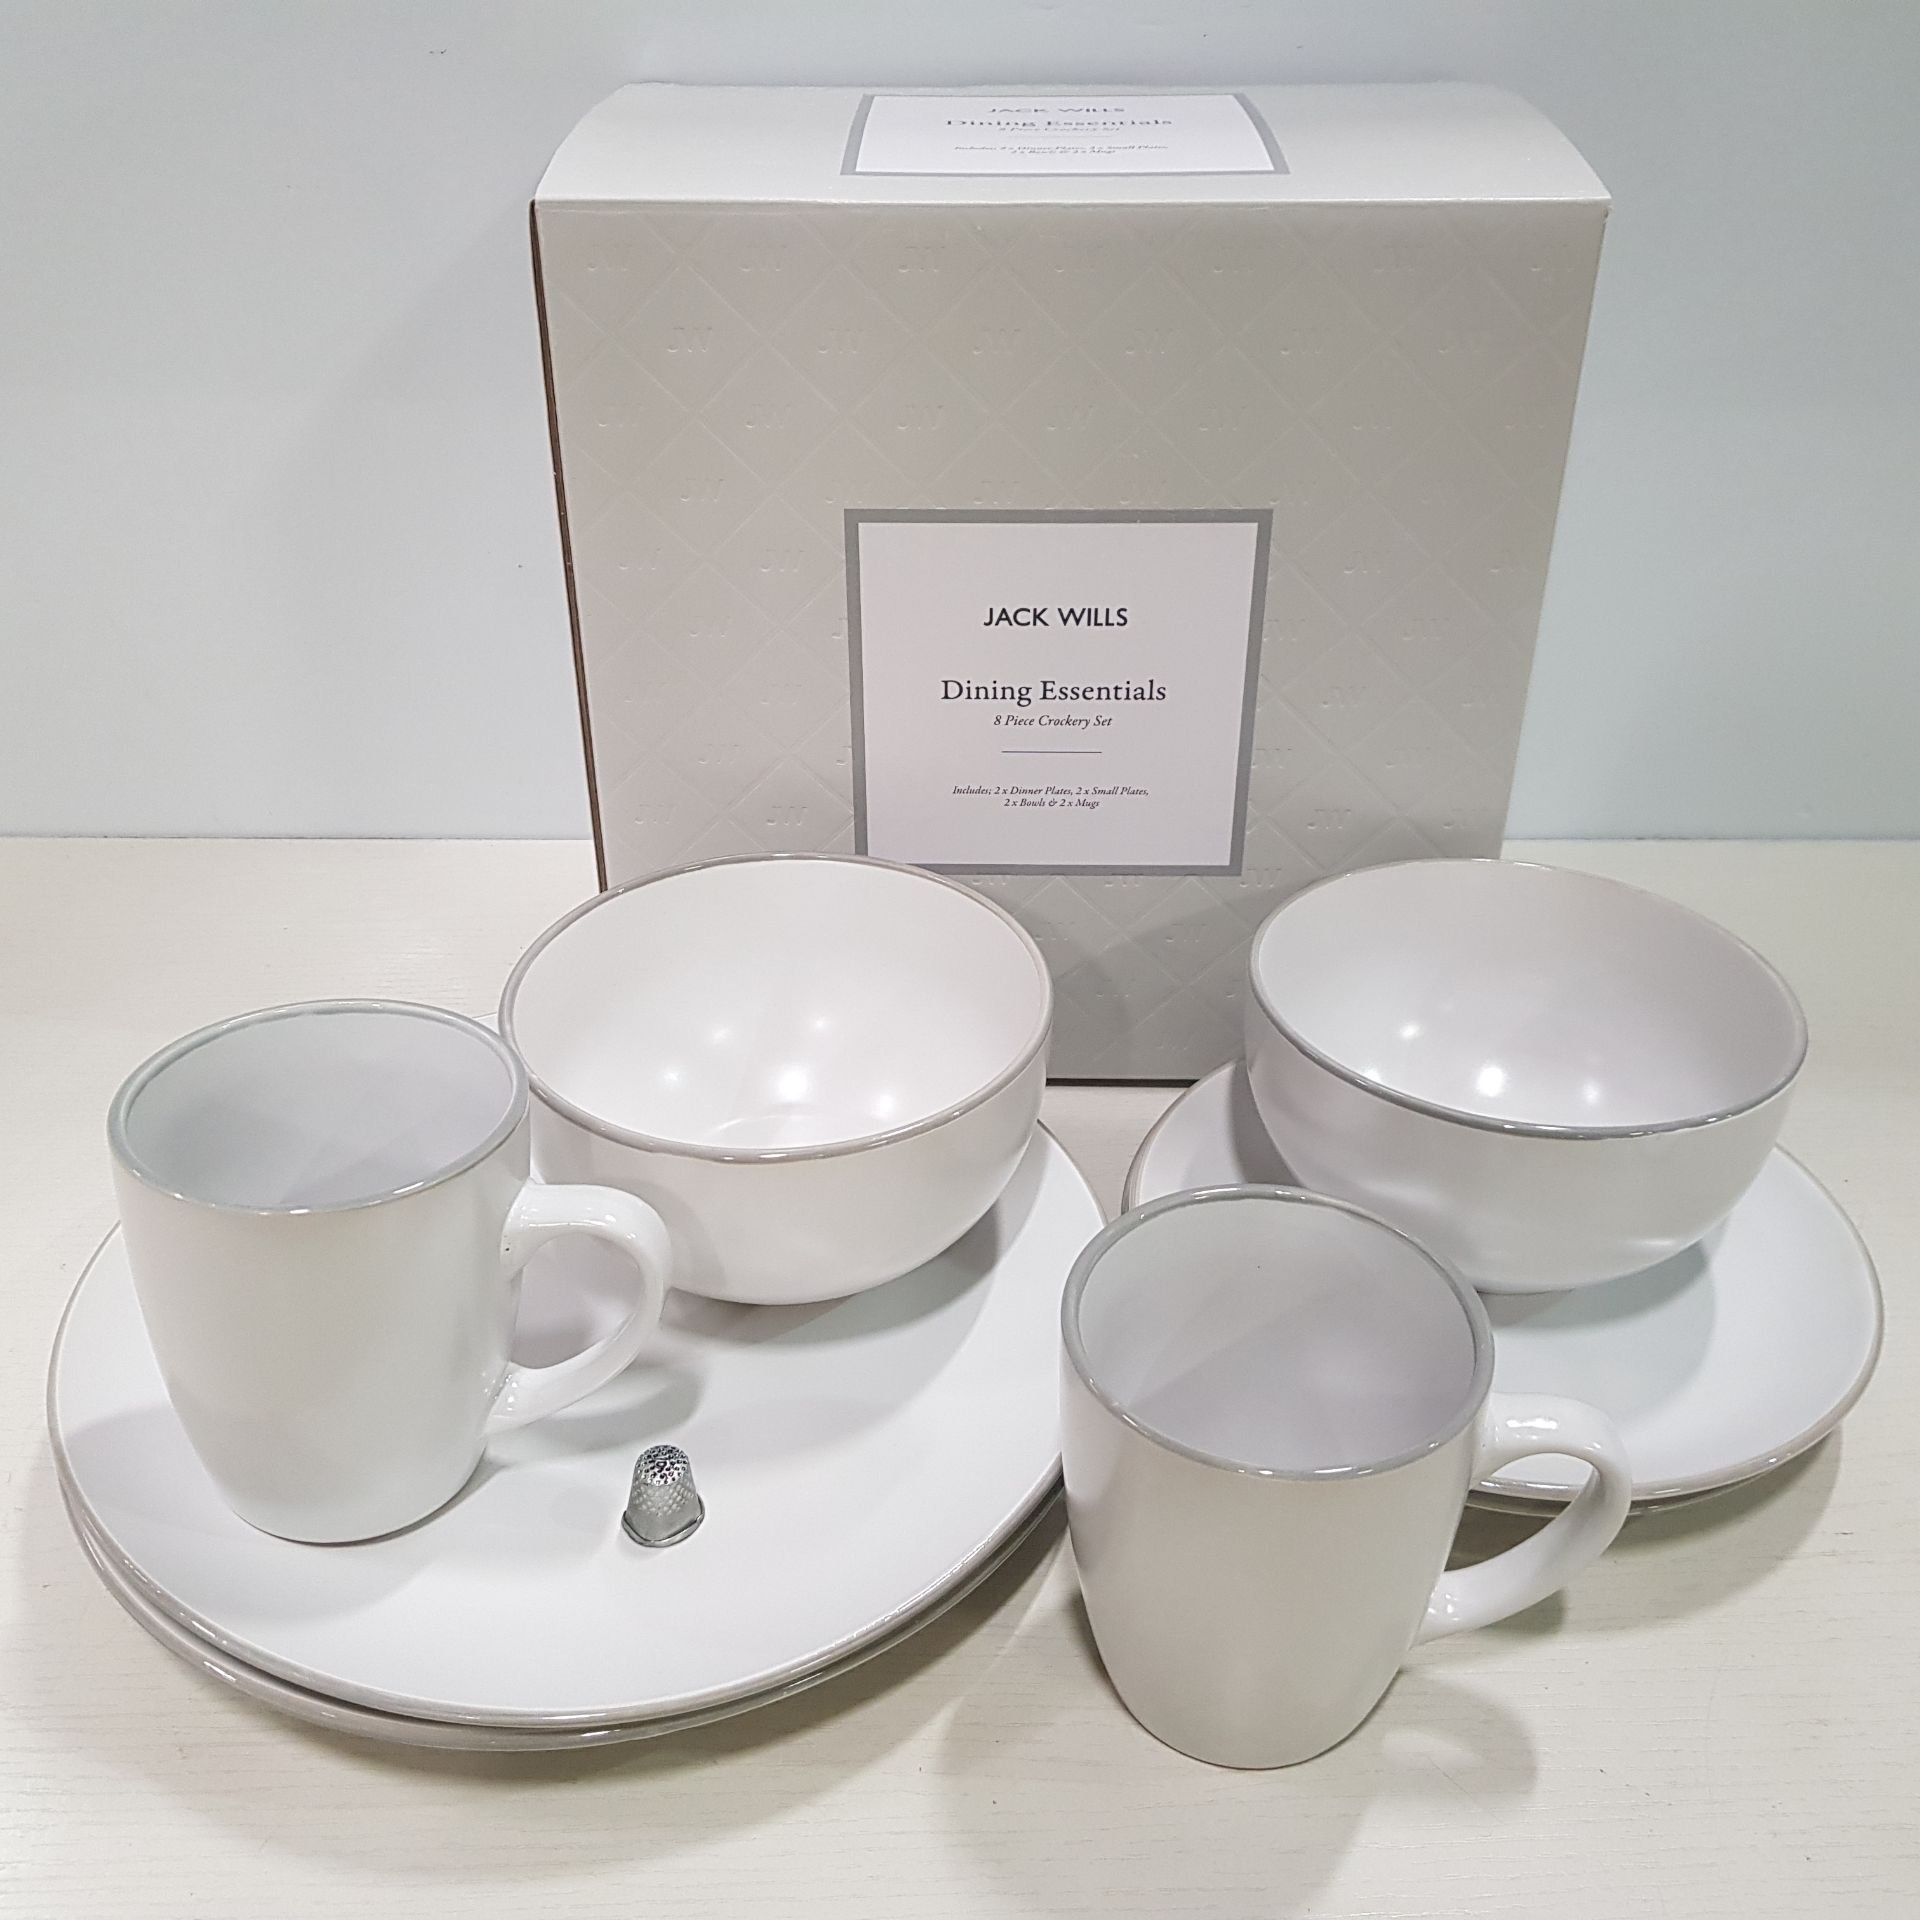 10 X BRAND NEW JACK WILLS BOXED DINING ESSENTIALS 8 PIECE CROCKERY SET TO INCLUDE 2X DINNER PLATES 2